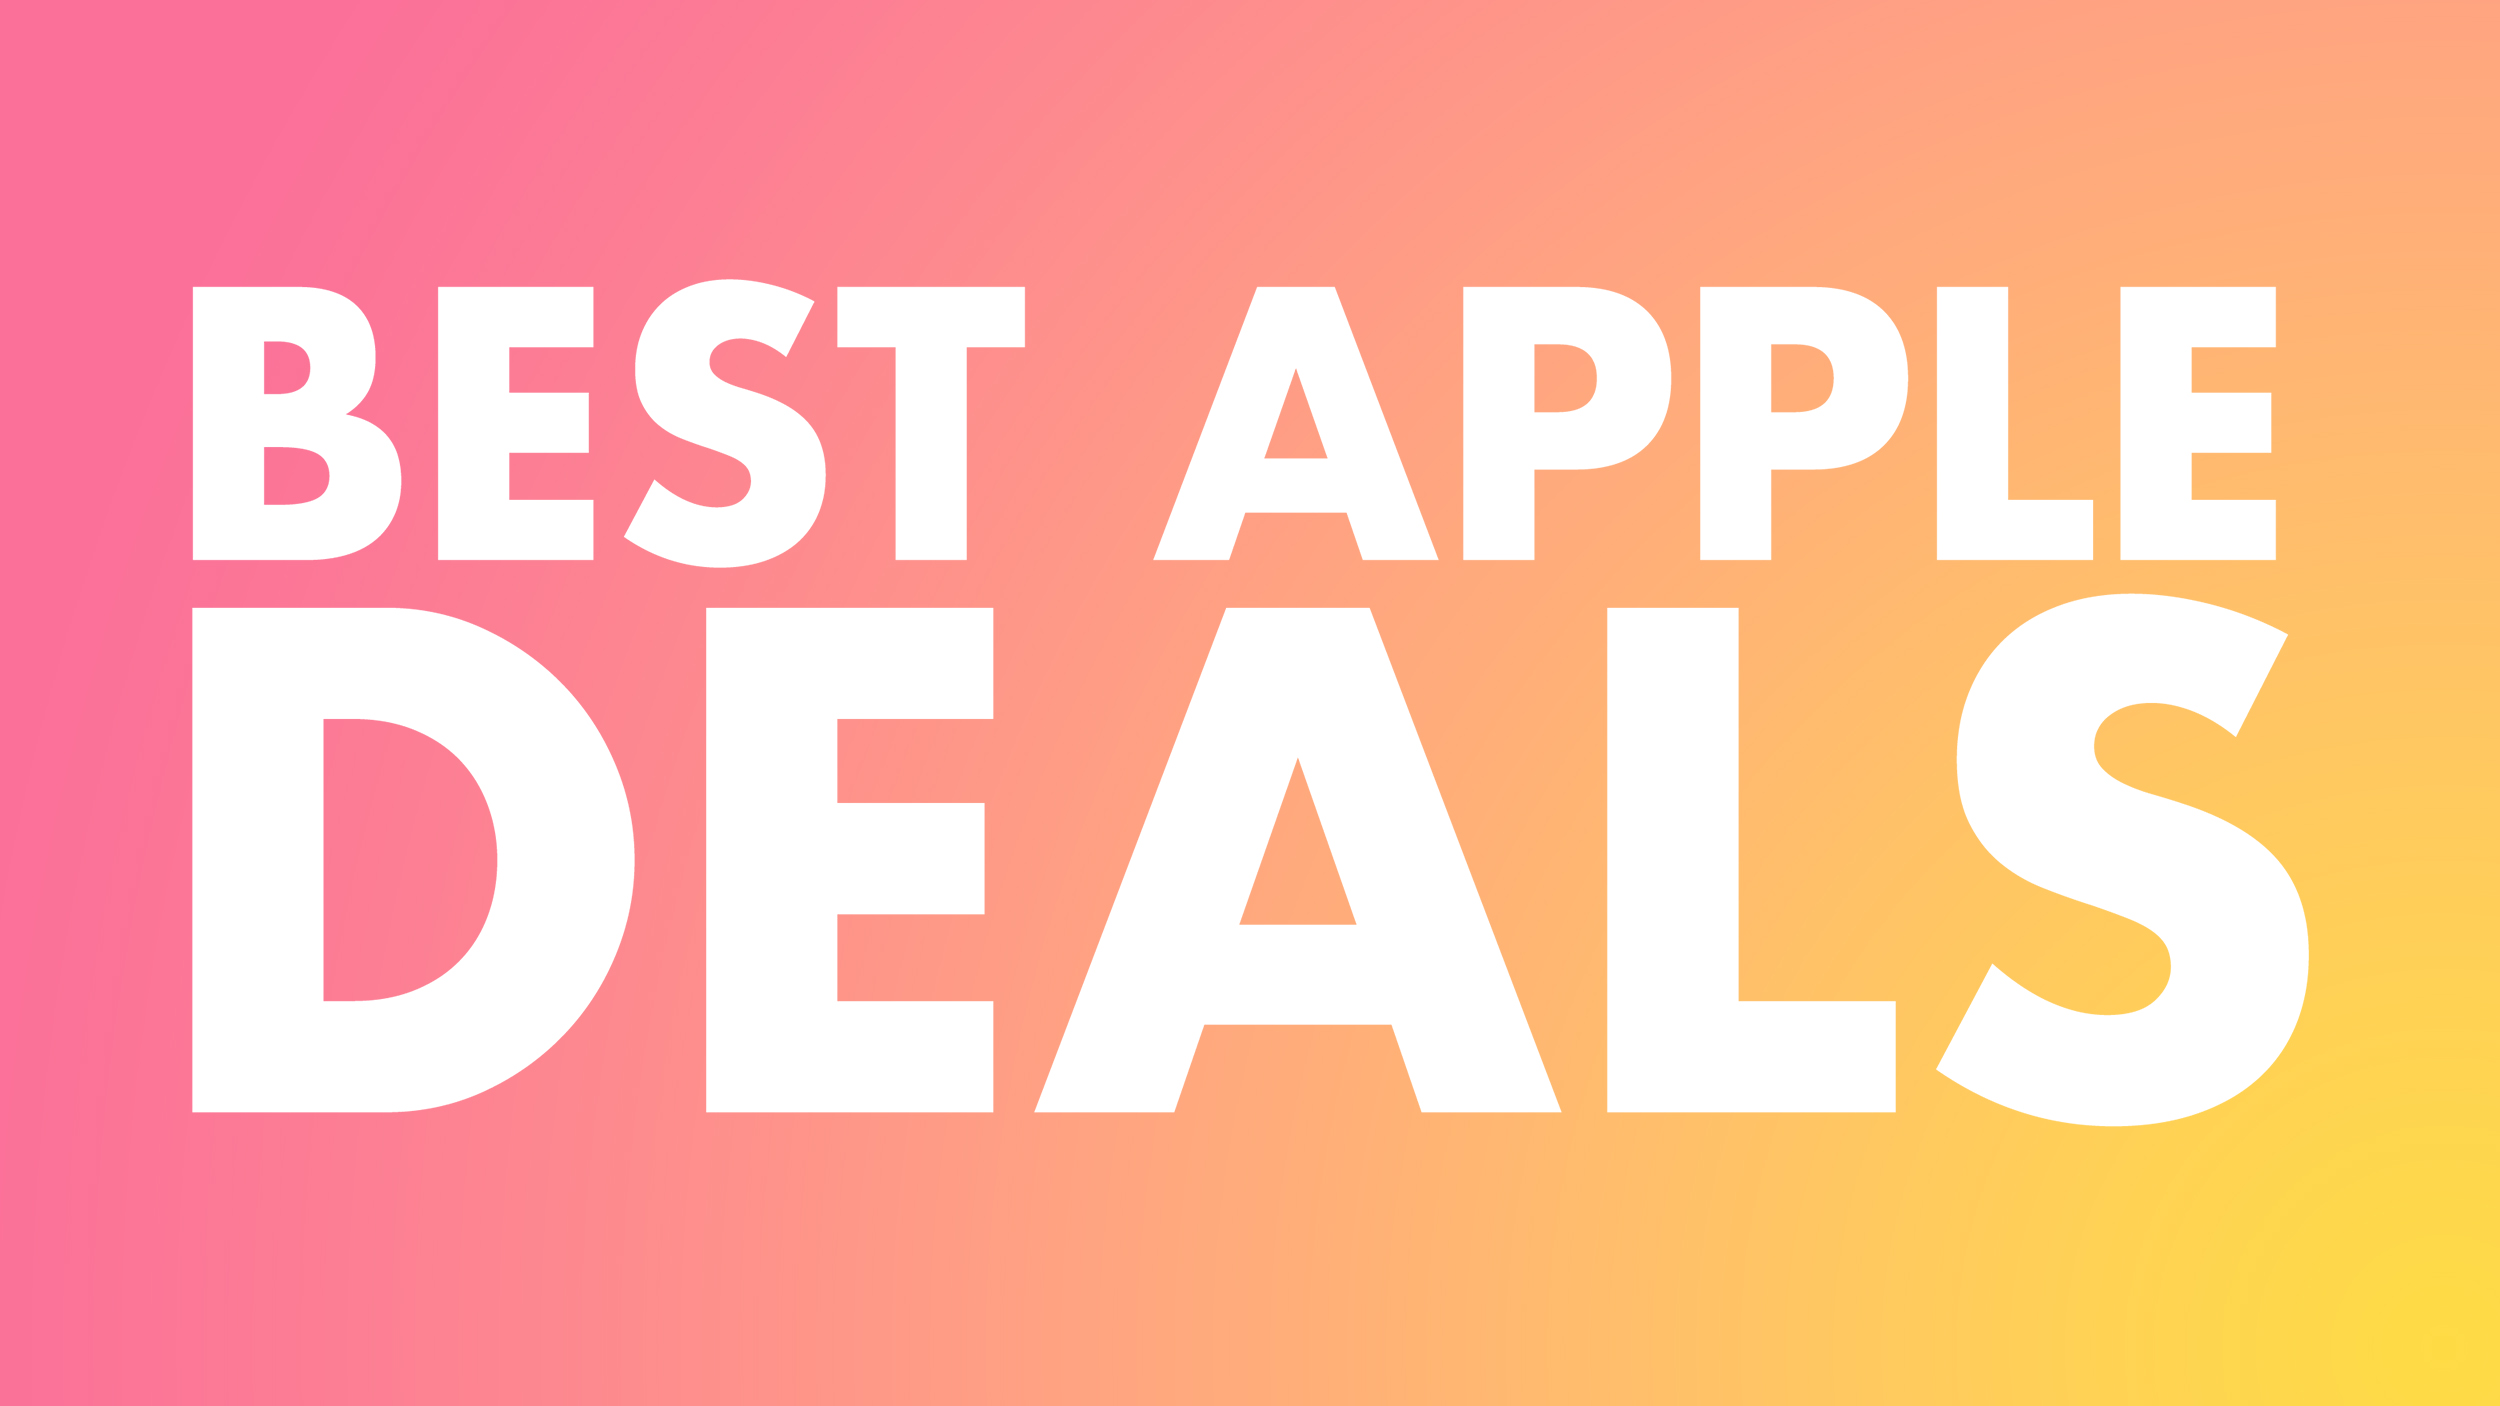 Best Apple Deals of the Week: M2 MacBook Air Hits New All-Time Low Price at $1,049, Plus Sales on AirPods Pro and More